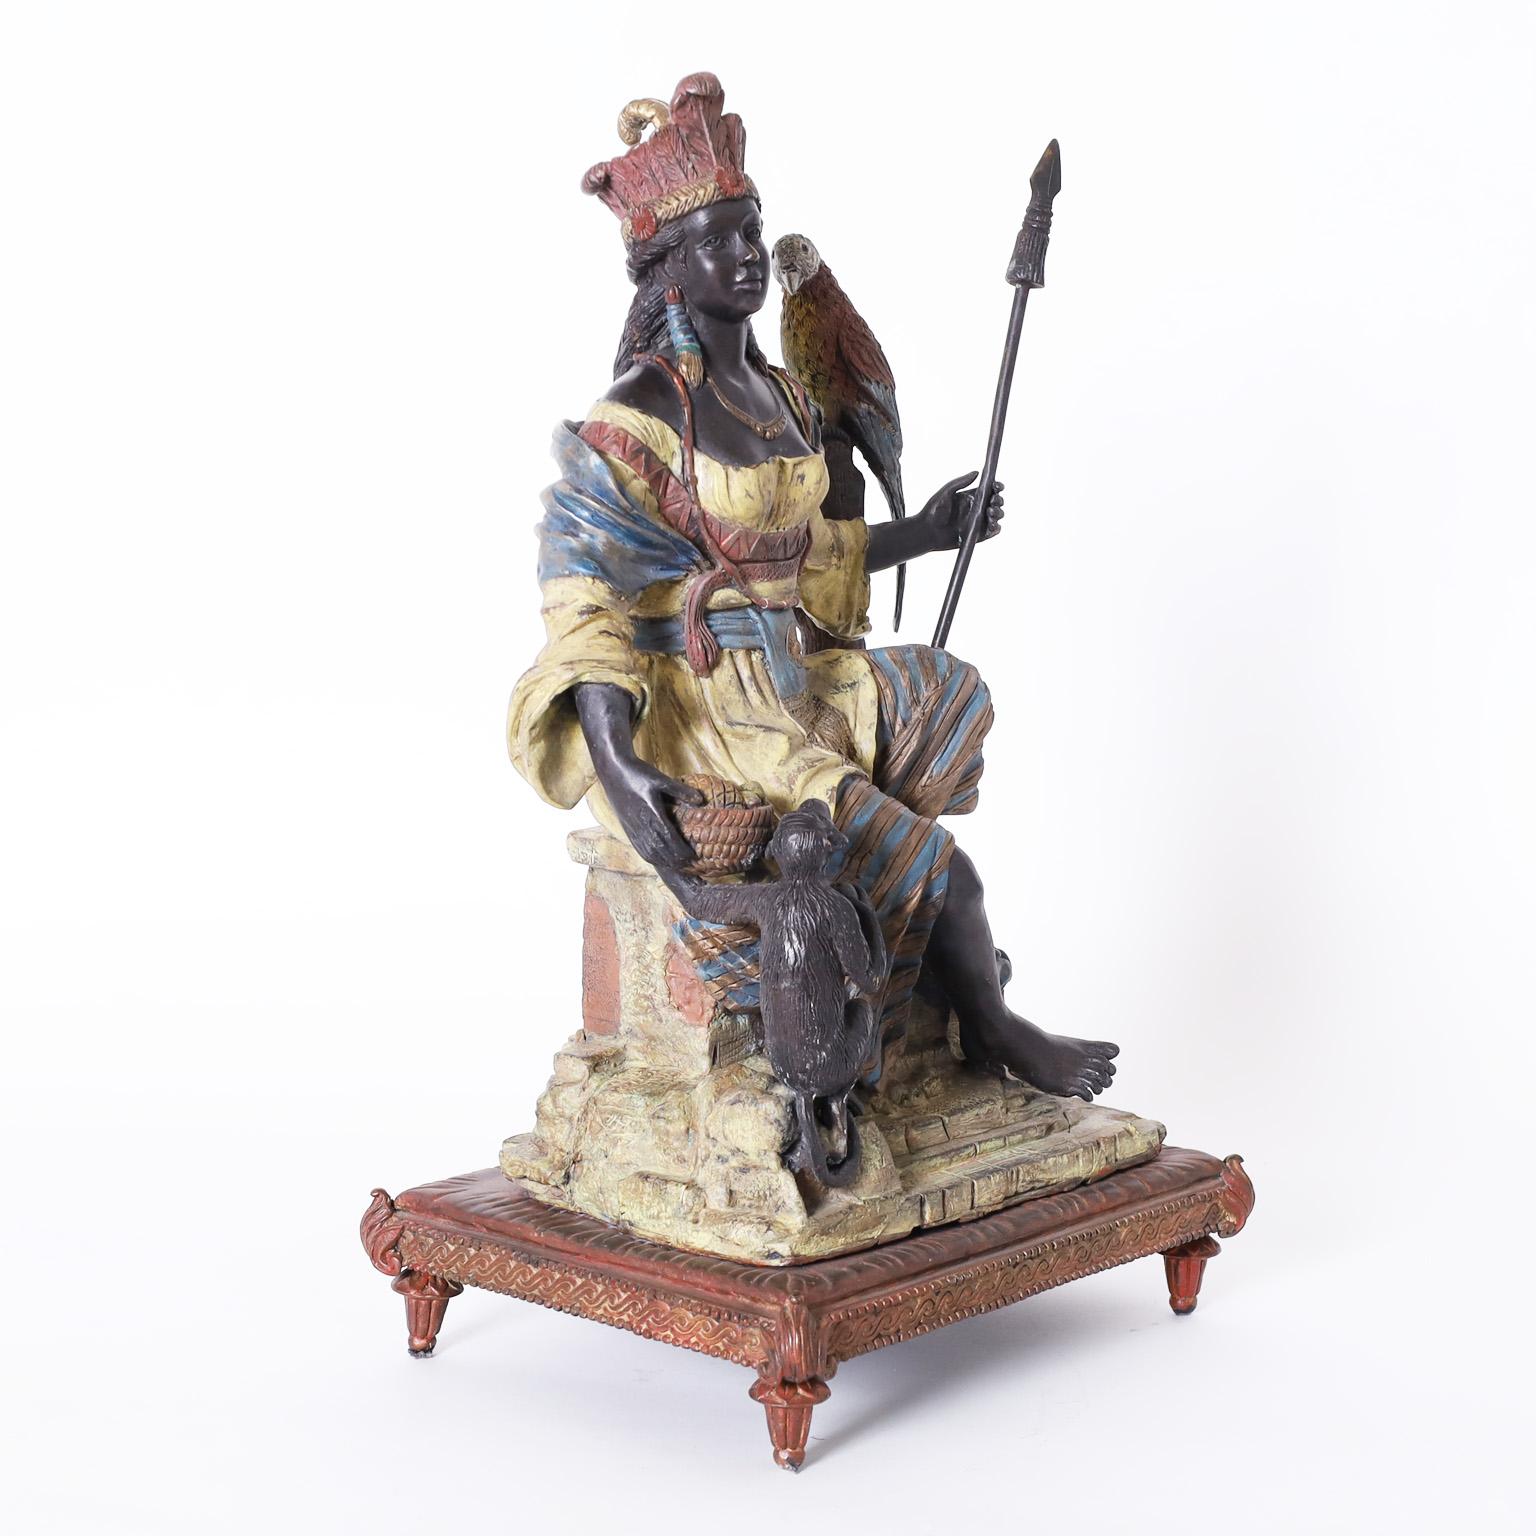 Antique orientalist bronze with an impressive composition depicting a female warrior with a spear, a parrot on a tree stump, and a monkey with a fruit bowl all with the original cold painted finish.